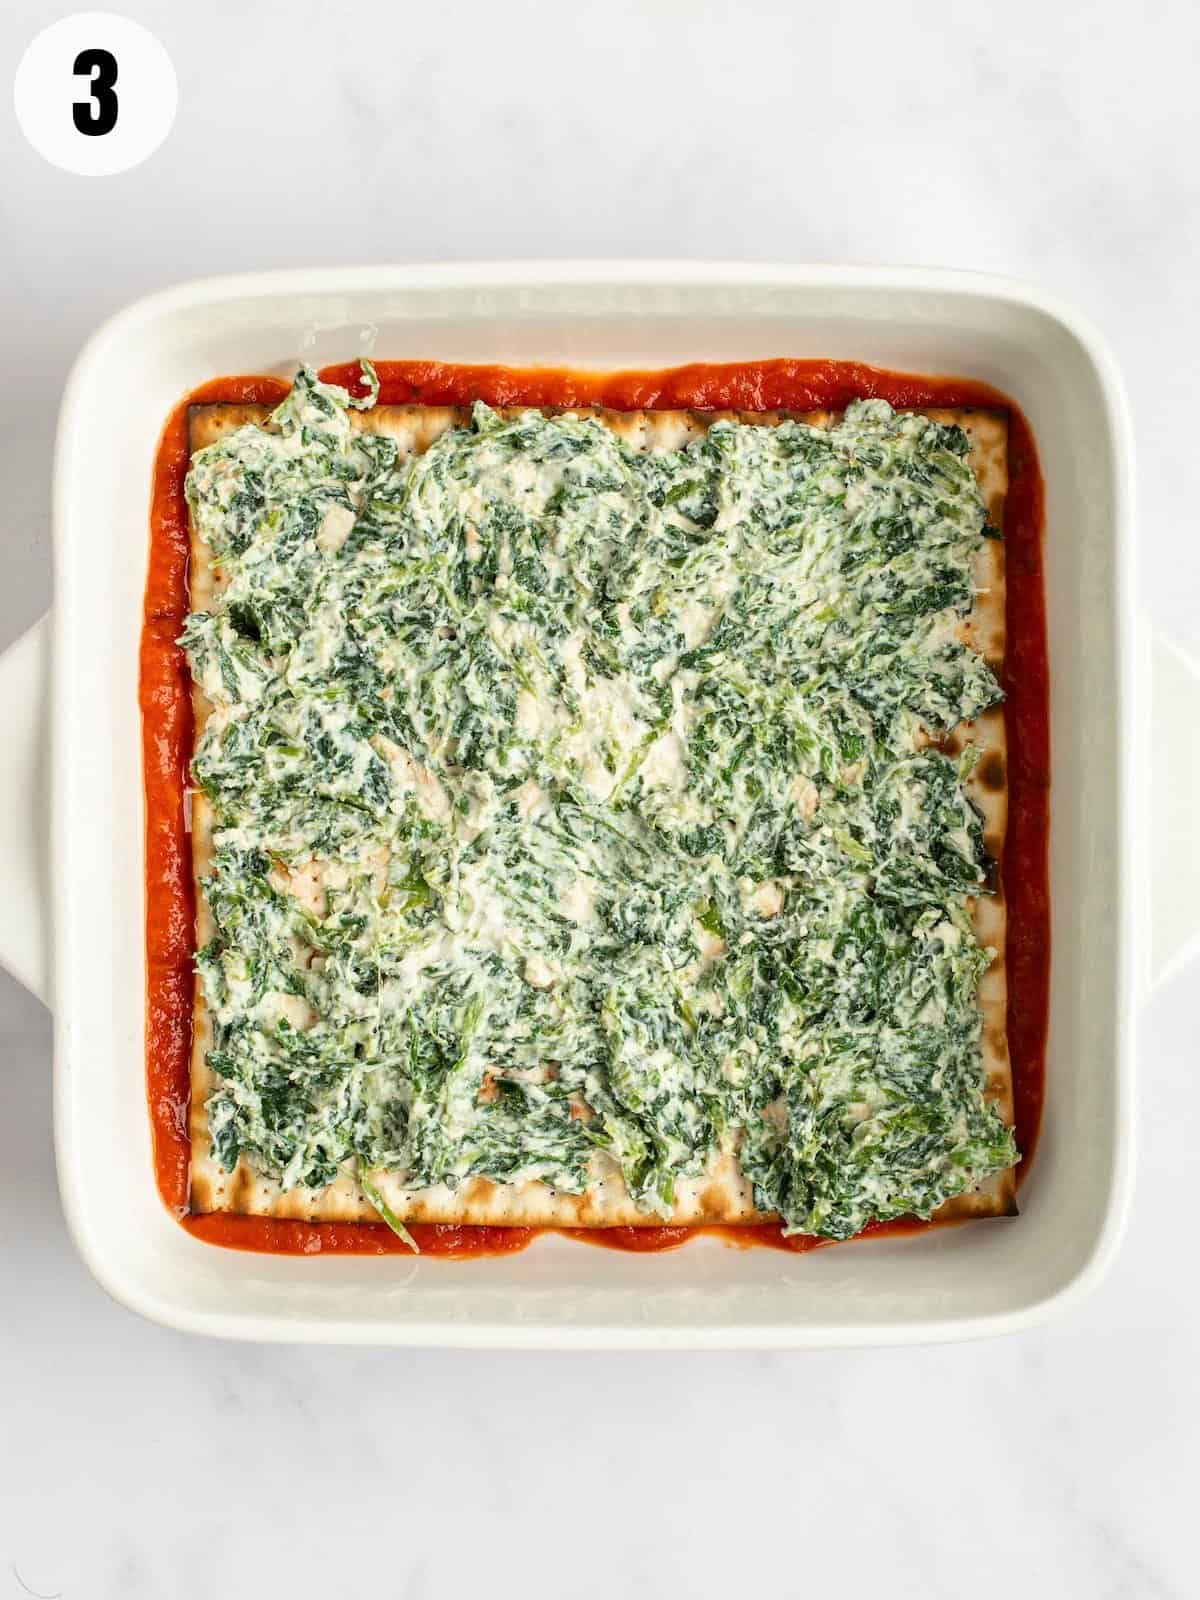 Layering ricotta and spinach on passover lasagna.